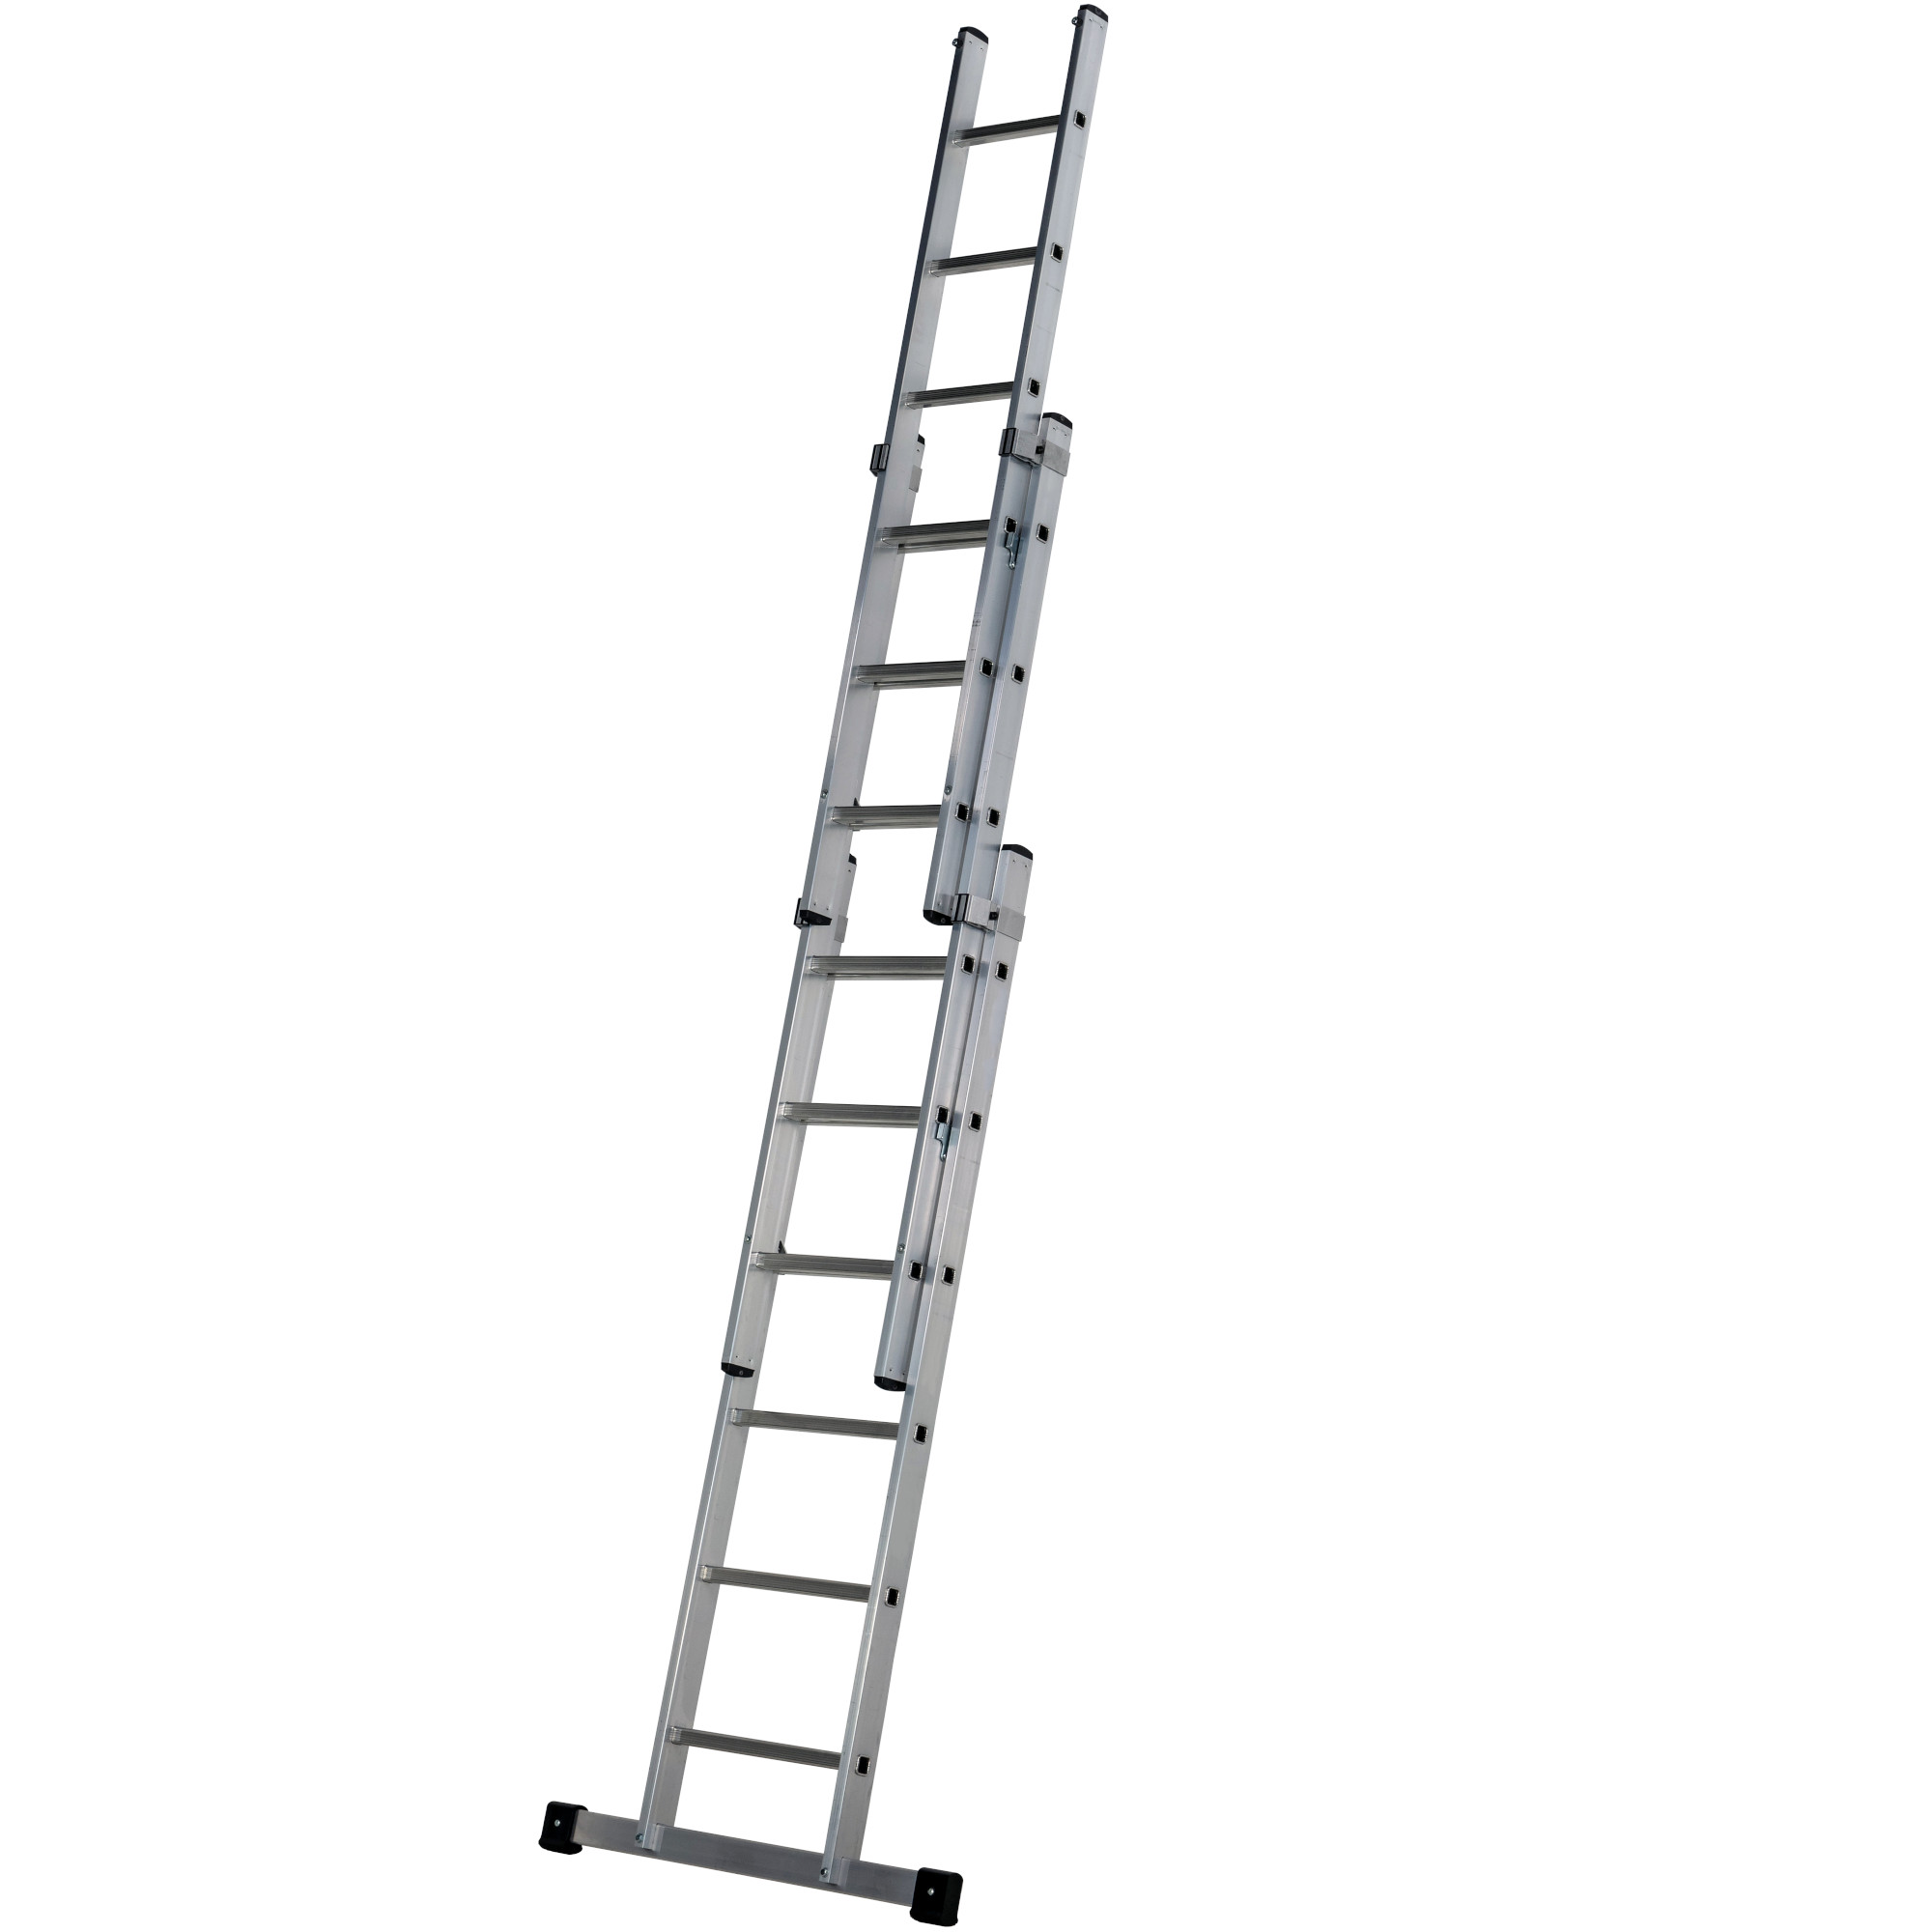 Youngman Trade 200 3 Section Extension Ladder